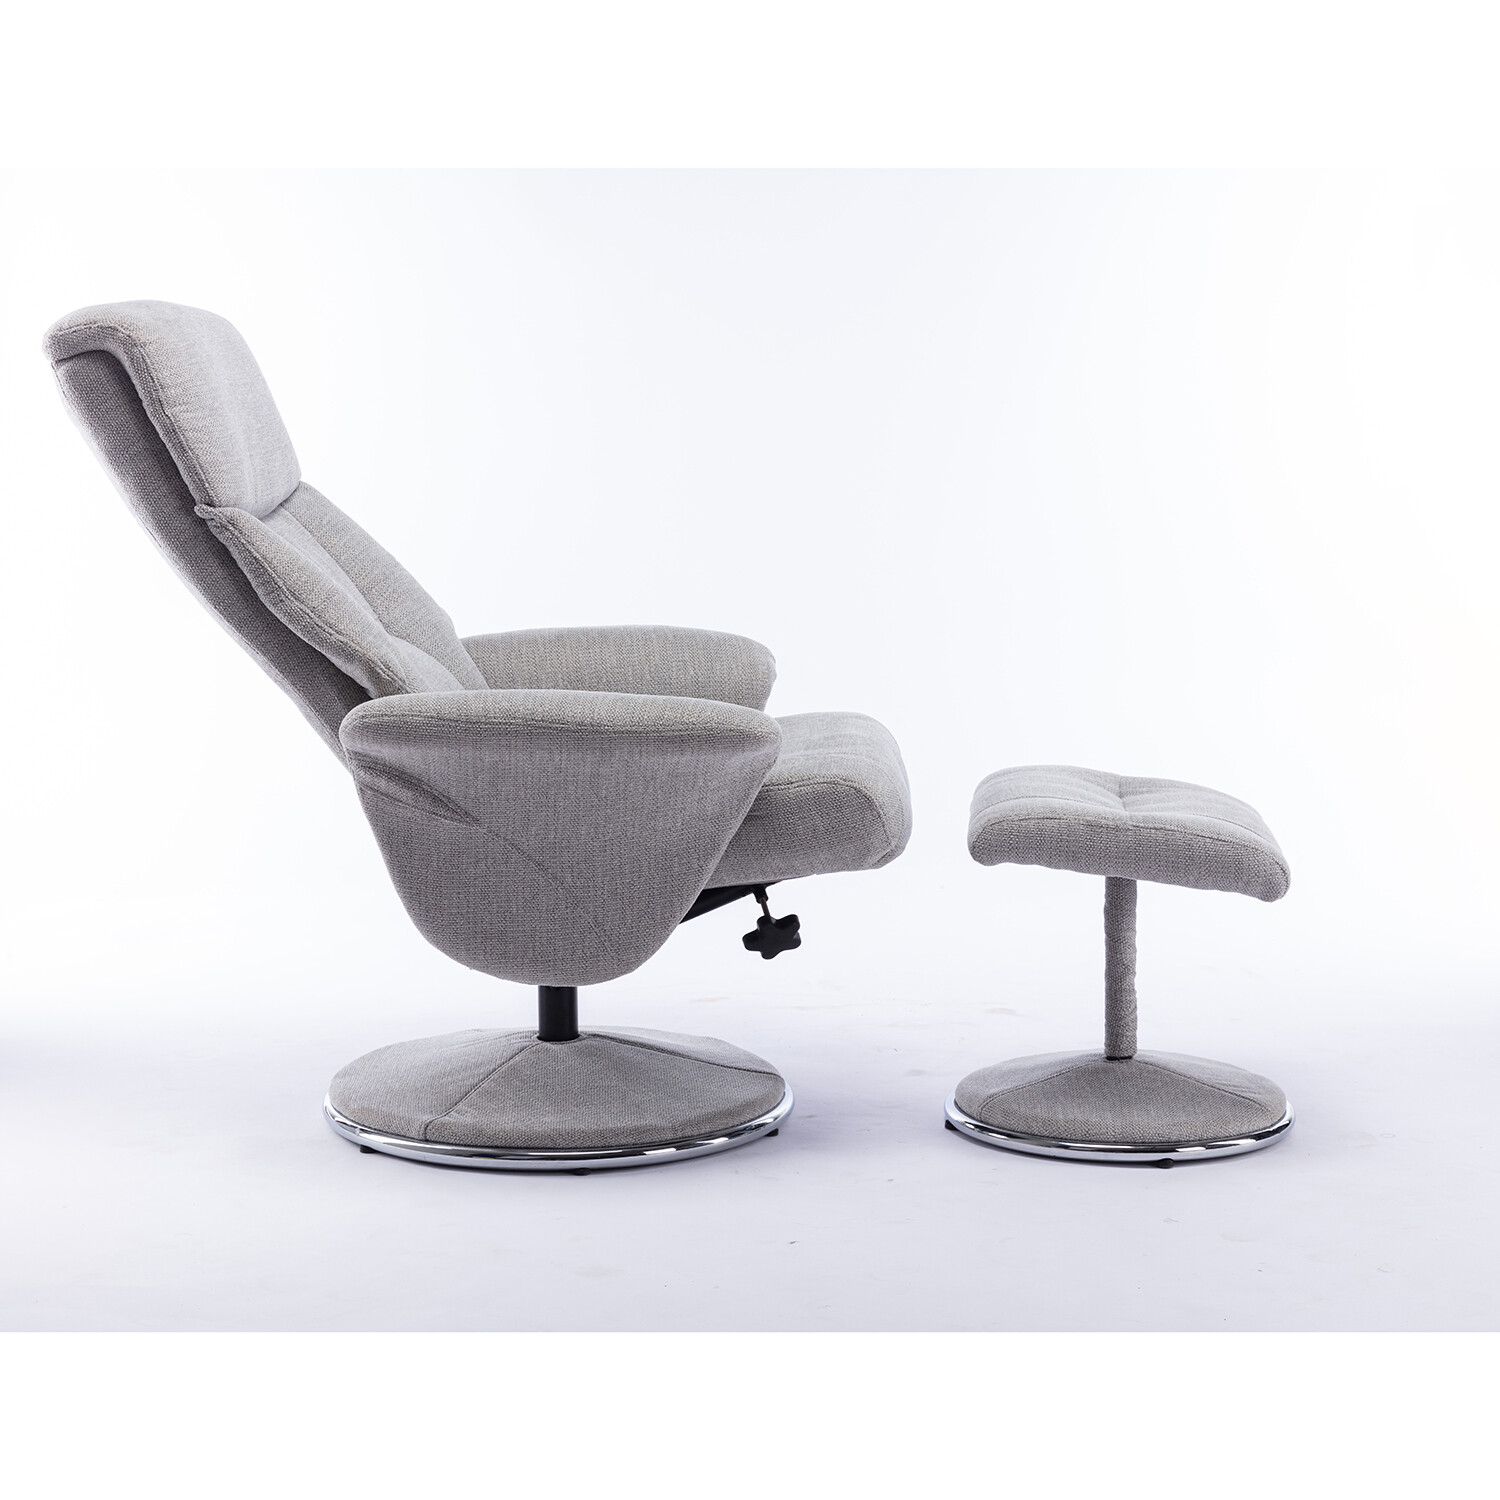 Madrid Grey Fabric Swivel TV Chair with Footrest Image 3